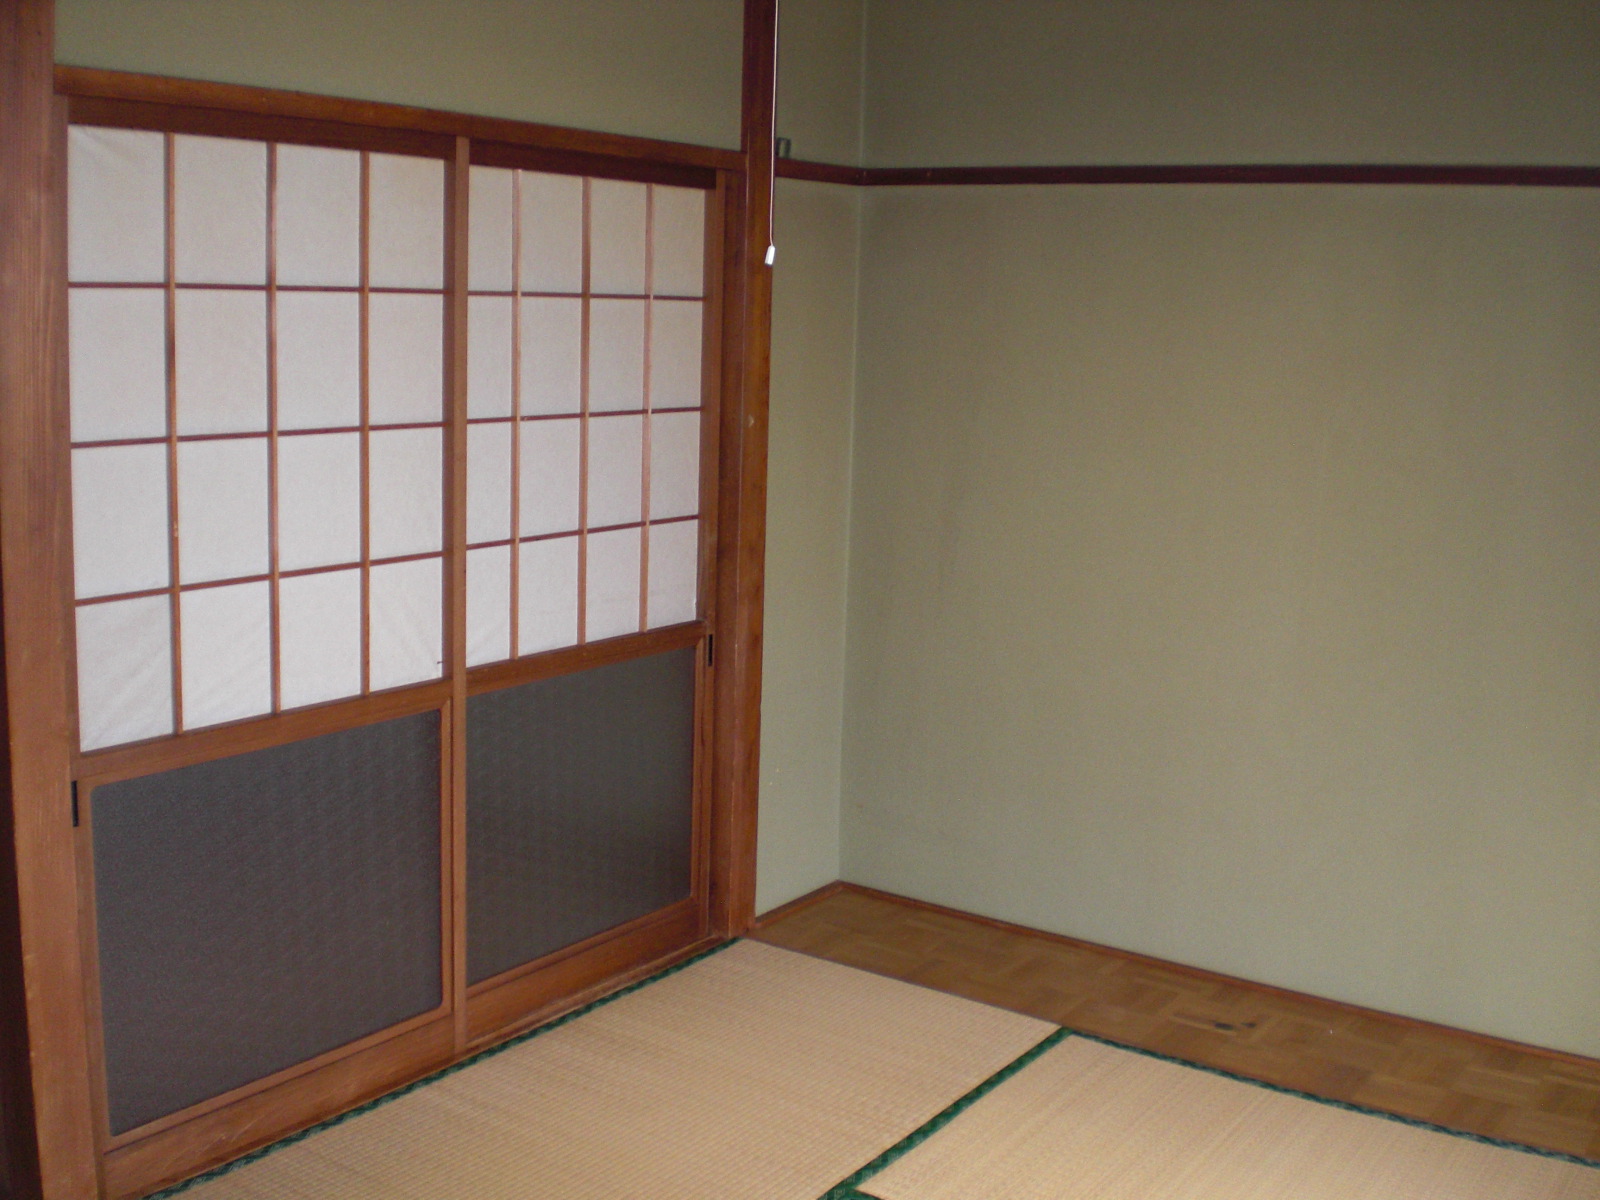 Living and room. Sliding door located between the kitchen and Japanese-style room